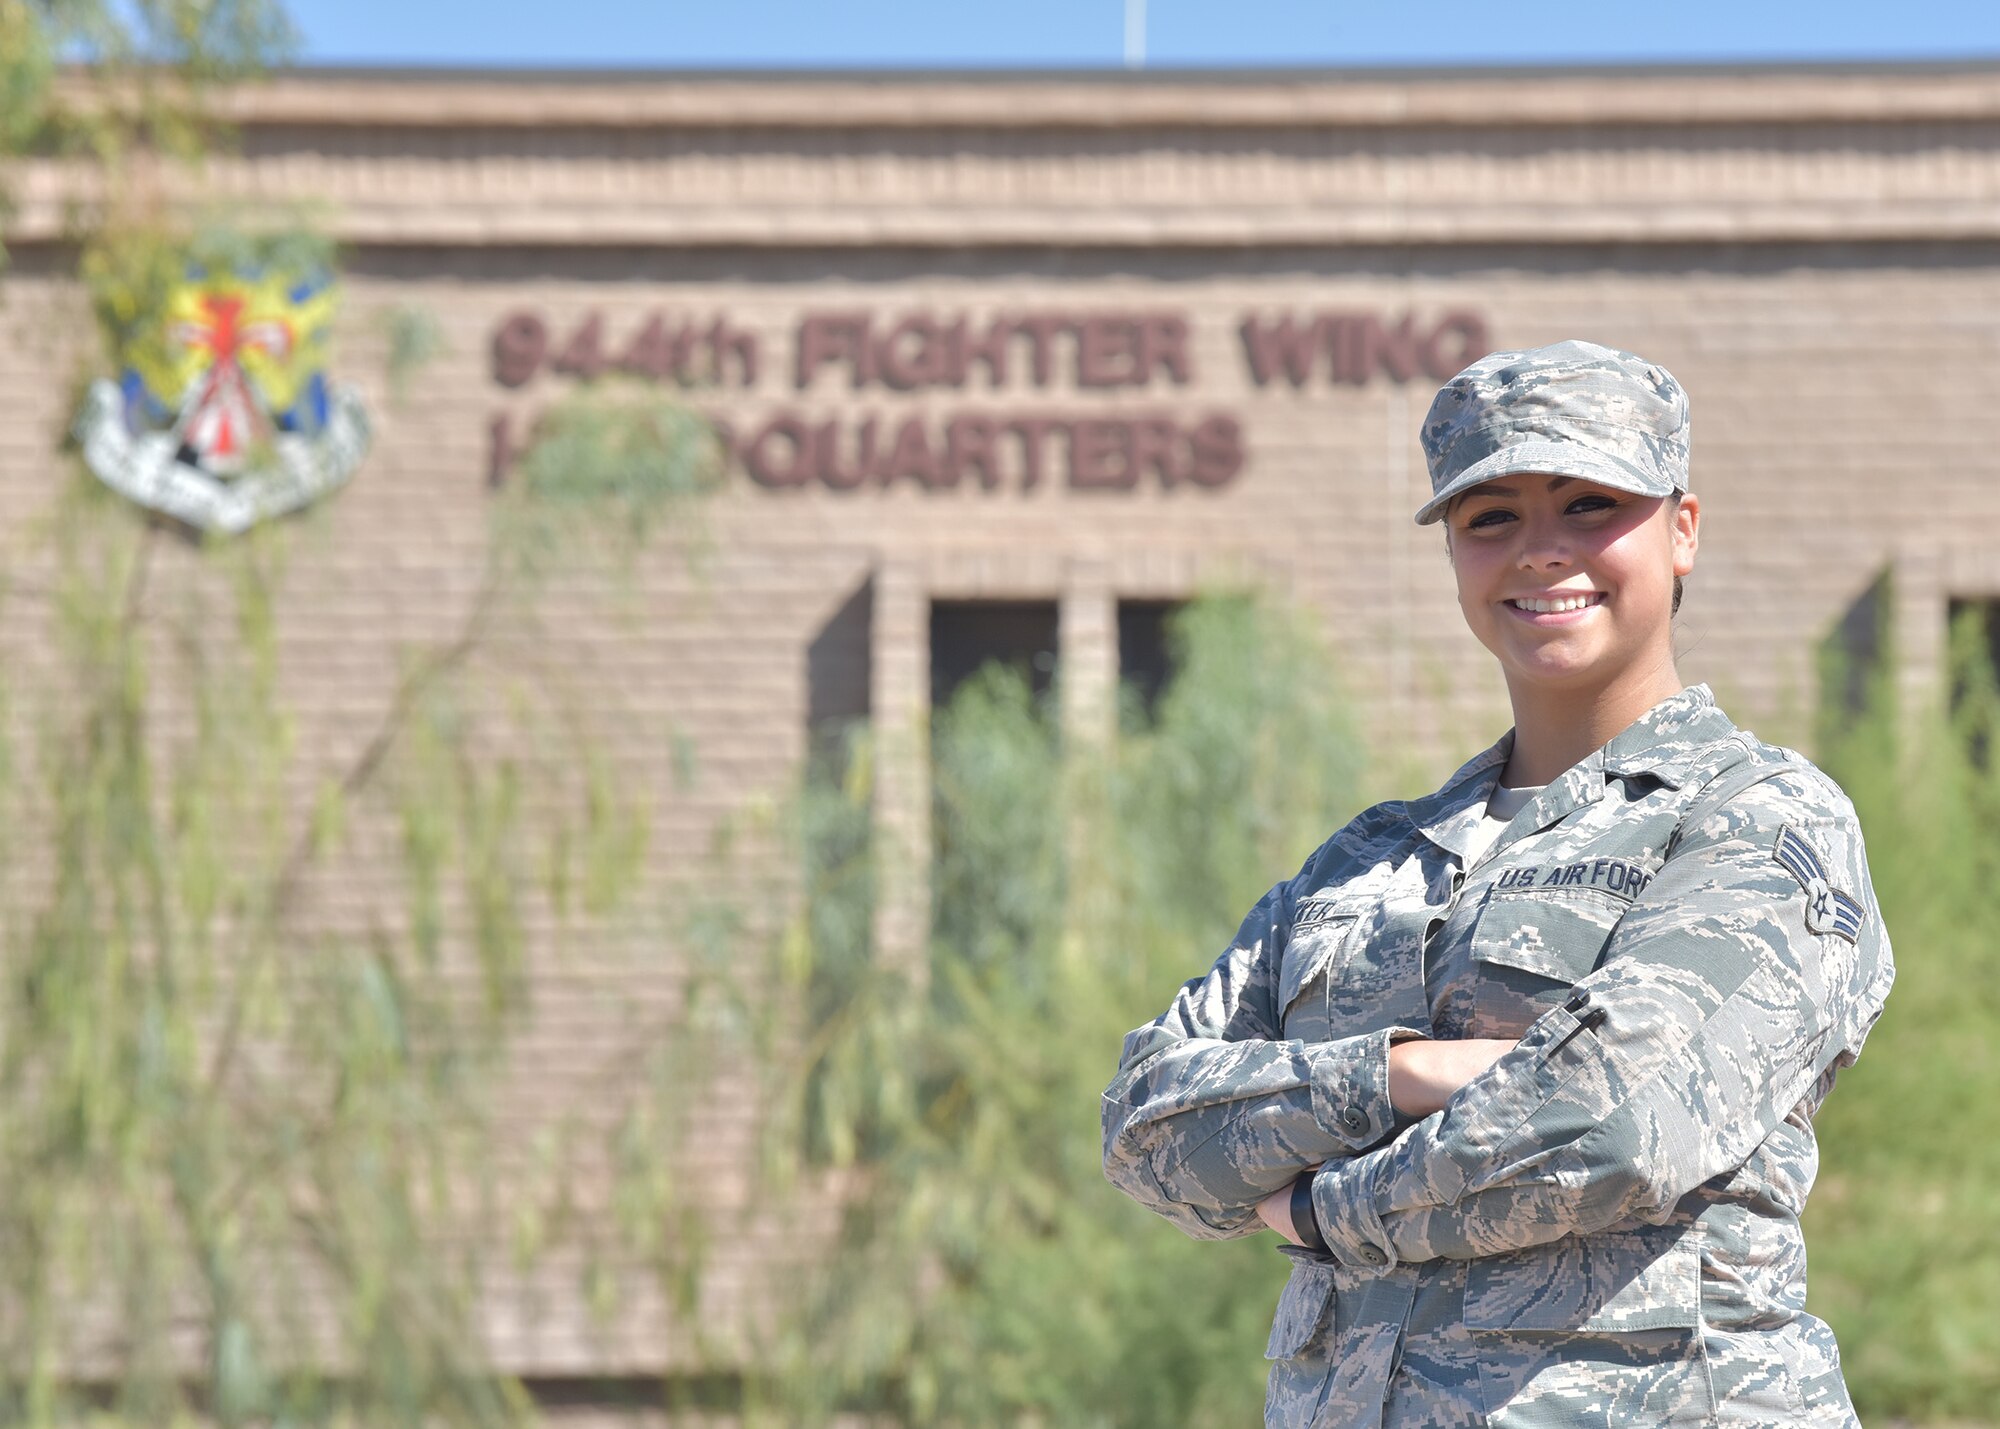 The April 944th Fighter Wing Warrior of the Month is Senior Airman Emily Acker, 944th Aircraft Maintenance Squadron tactical aircraft maintenance specialist.